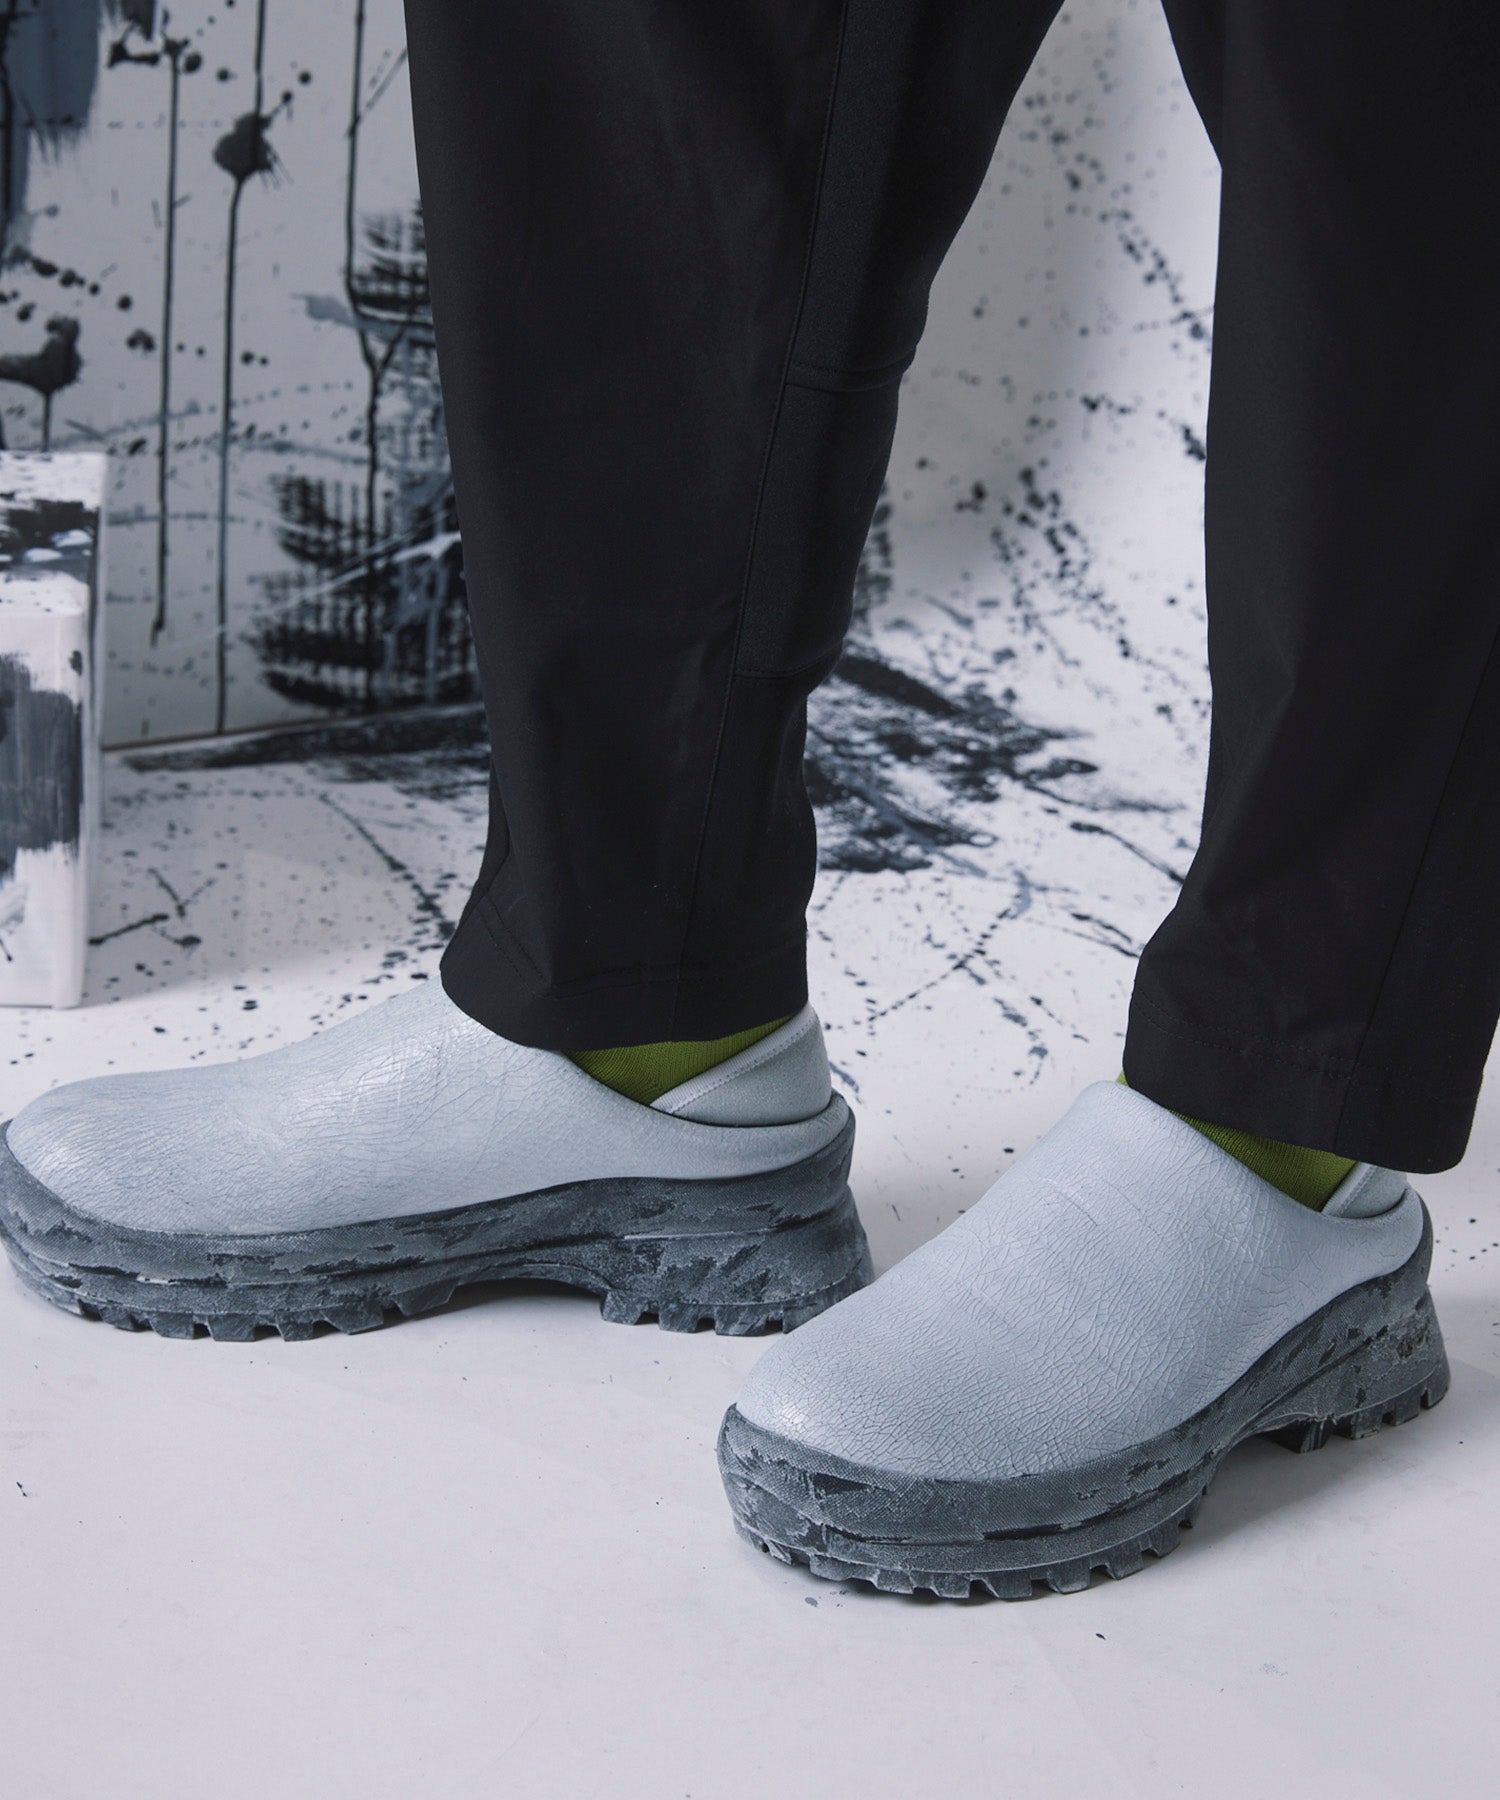 [Special SHOES FACTORY COLLABORATION] VIBRAM SOLE SLEP-ons Type Sneaker Made in Tokyo